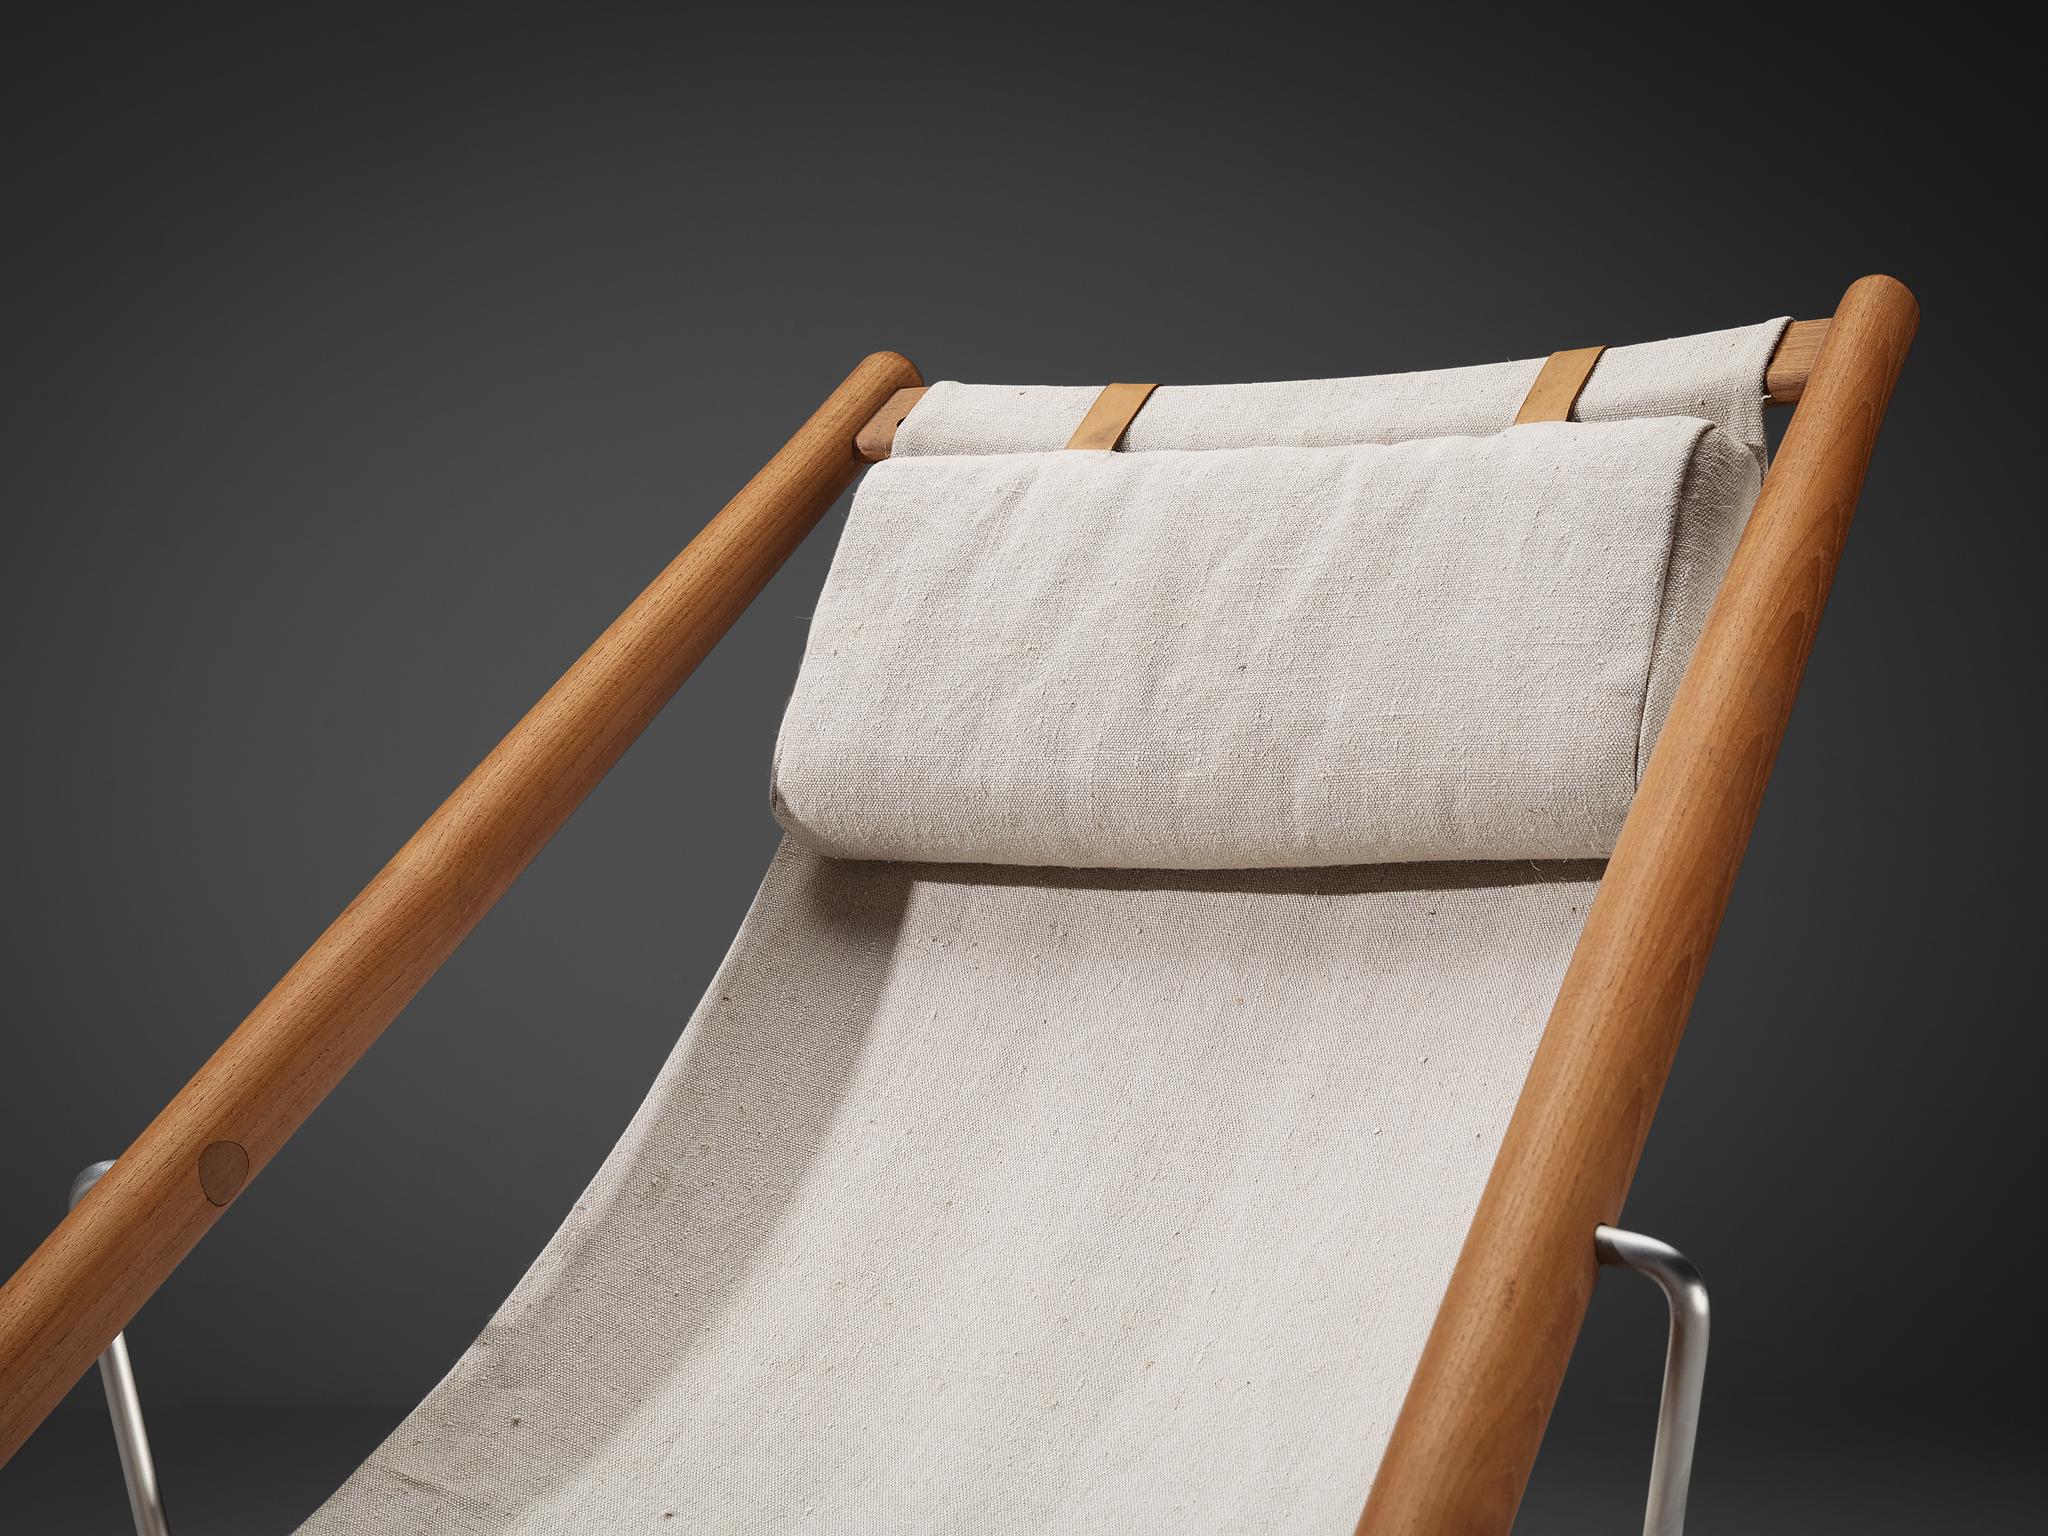 Mid-20th Century Björn Hulten for Berga Form Lounge Chair in Teak and Off-White Canvas